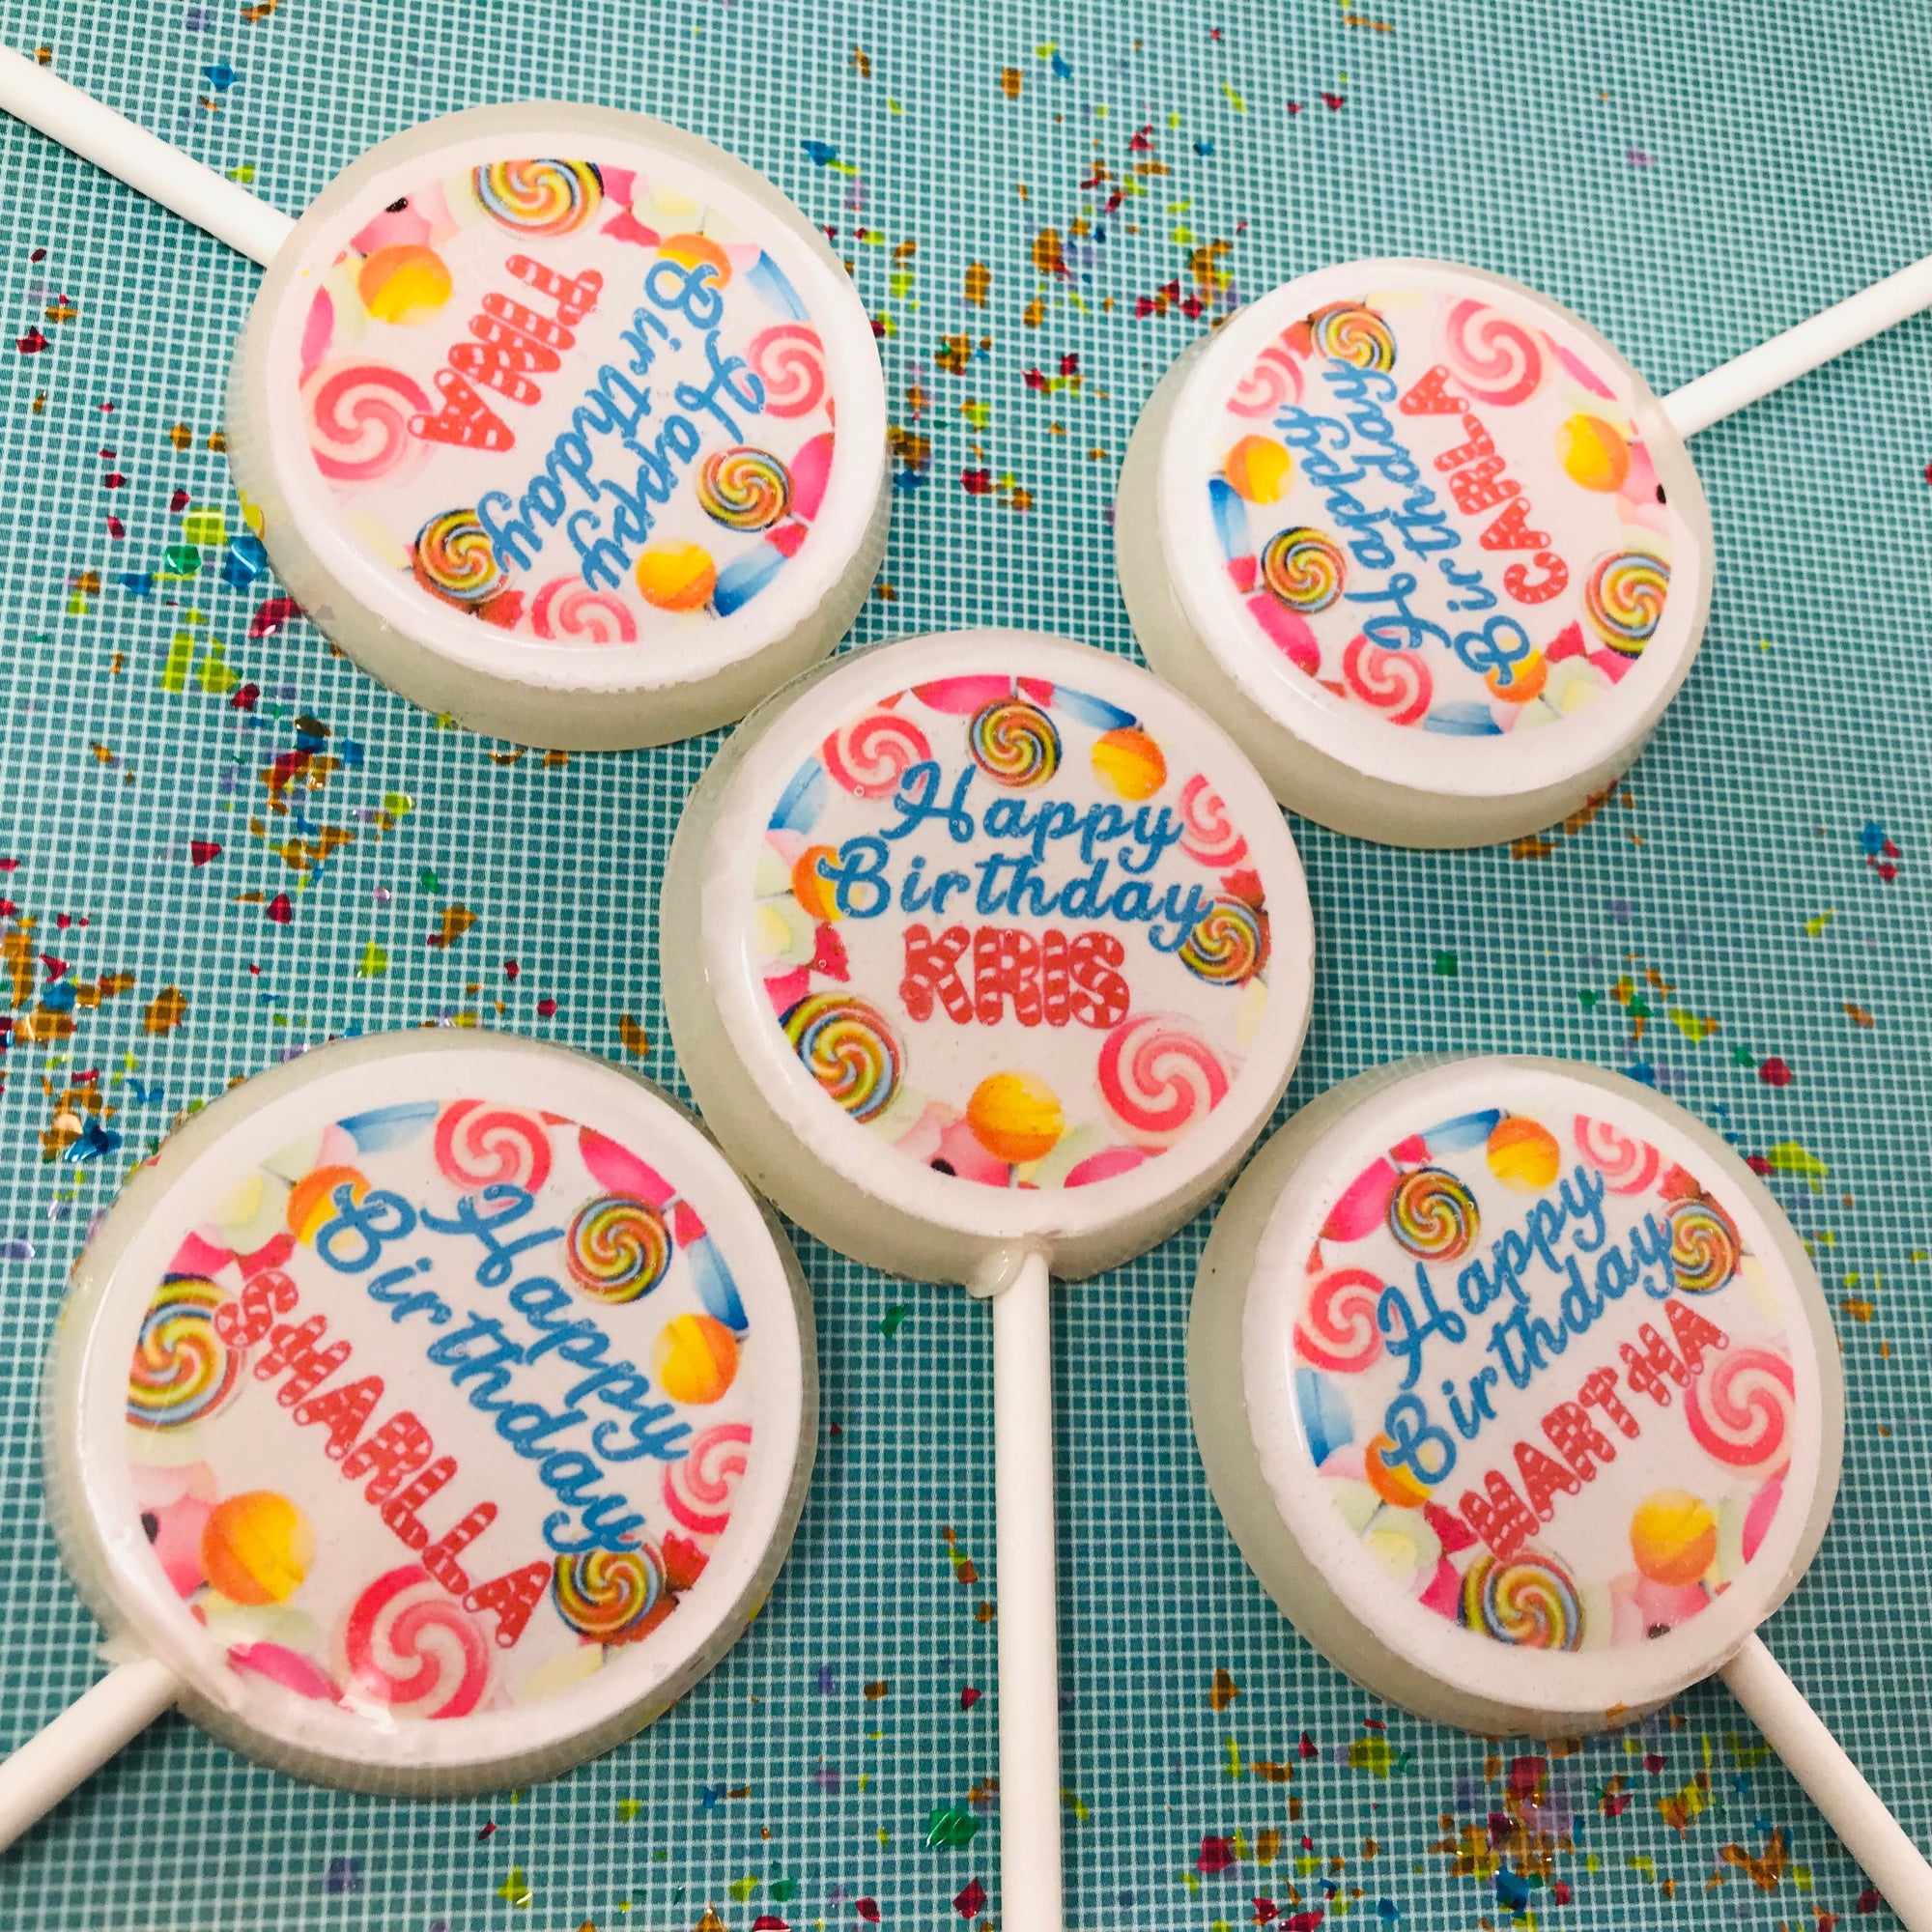 Happy Birthday to YOU Lollipops 5-piece set by I Want Candy!